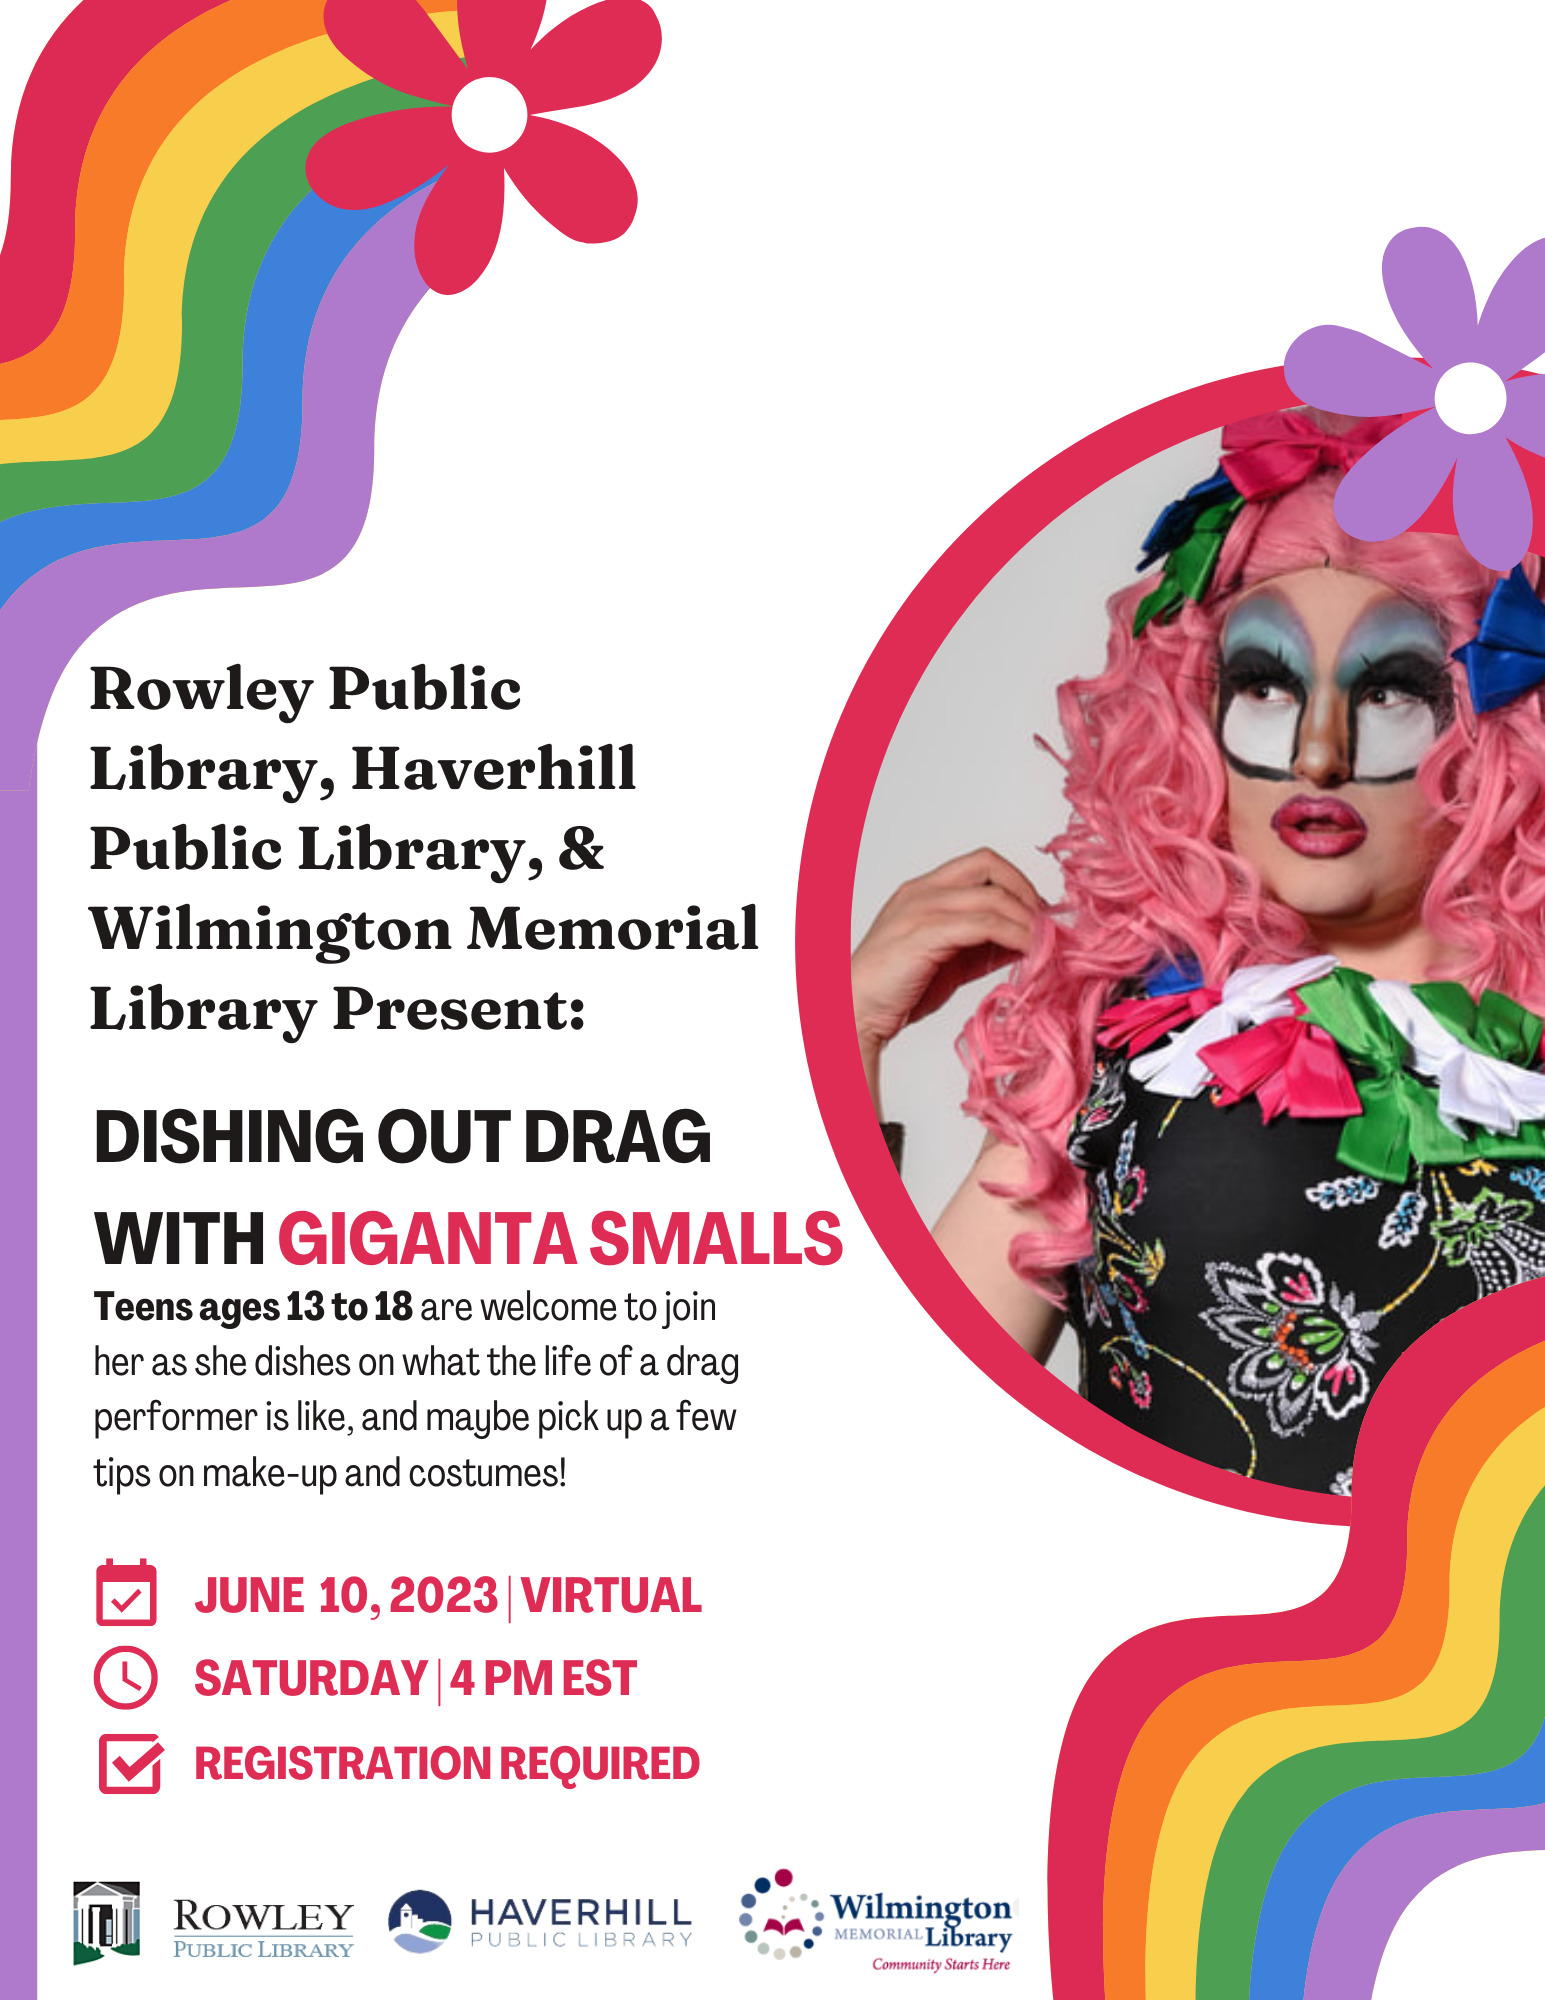 dishing out drag with Giganta Smalls